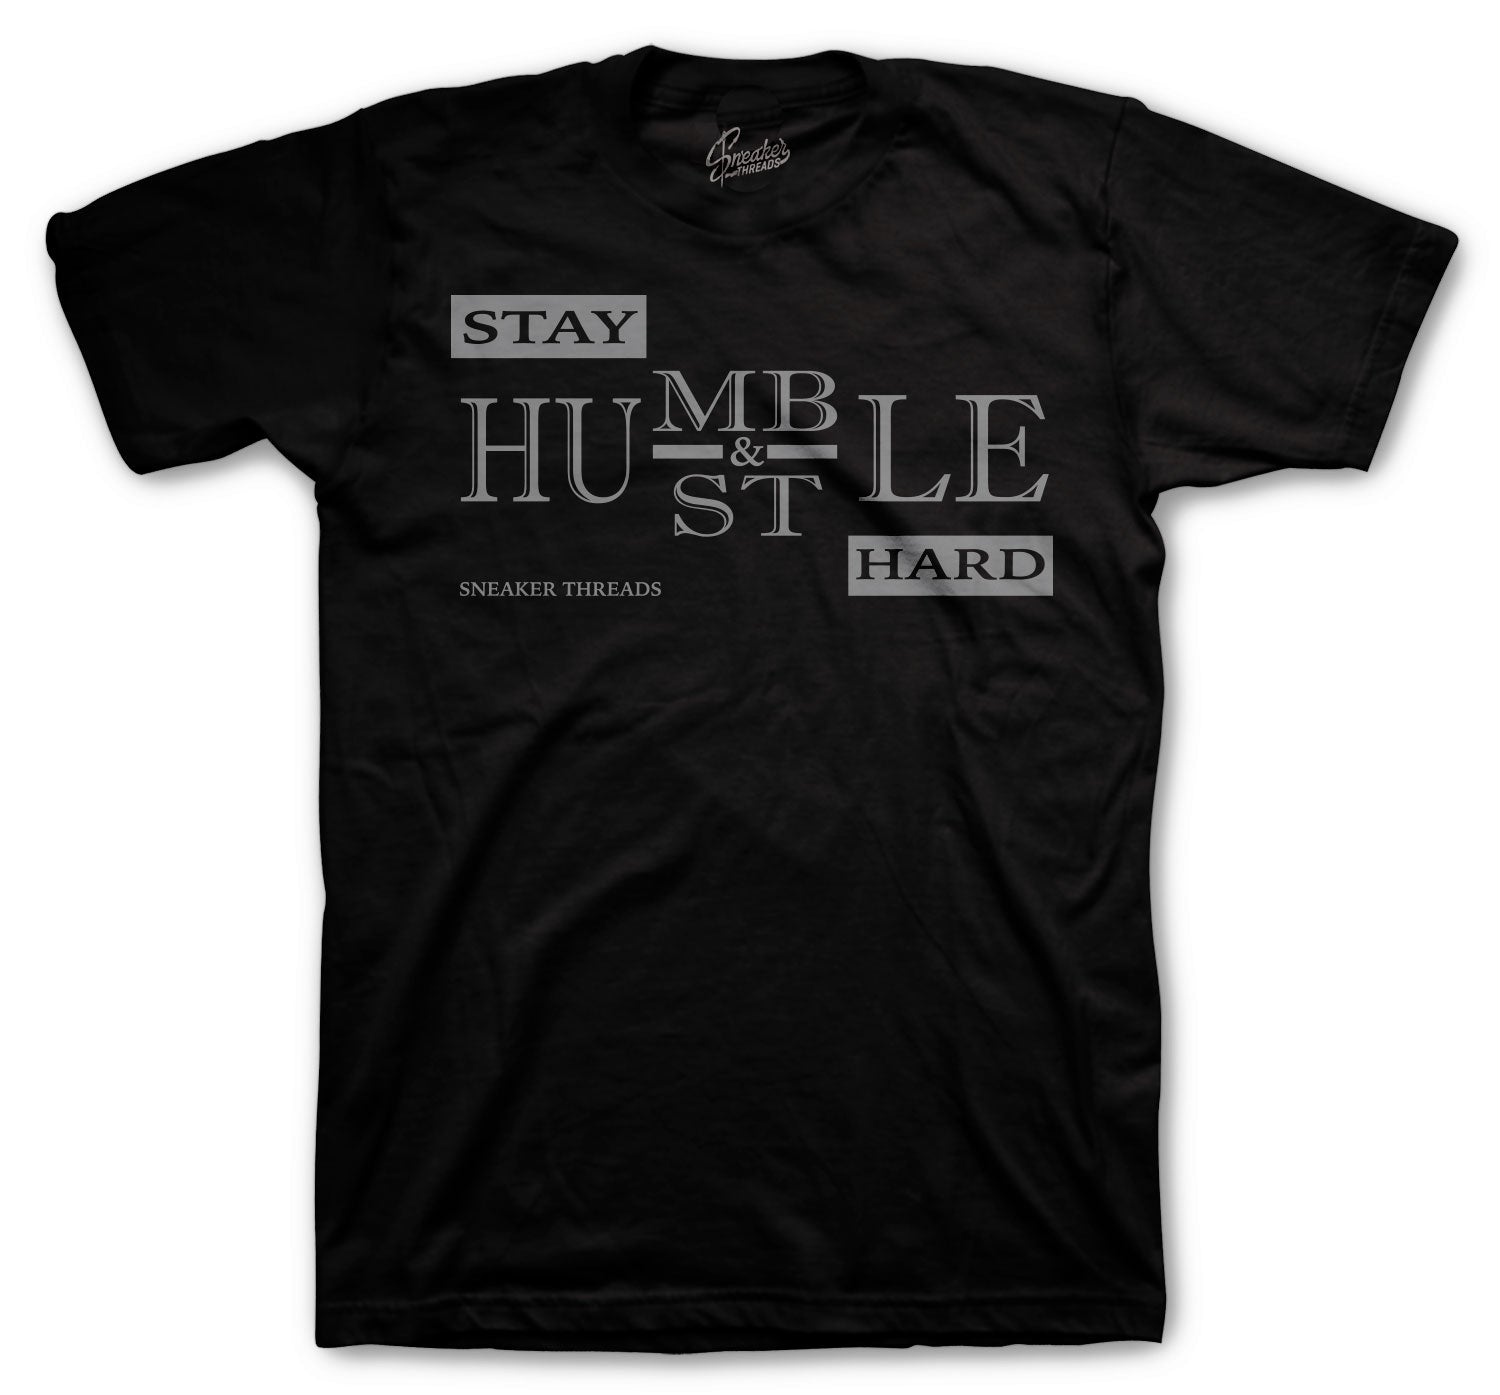 Foamposite Anthracite Shirt - Stay Humble - Black